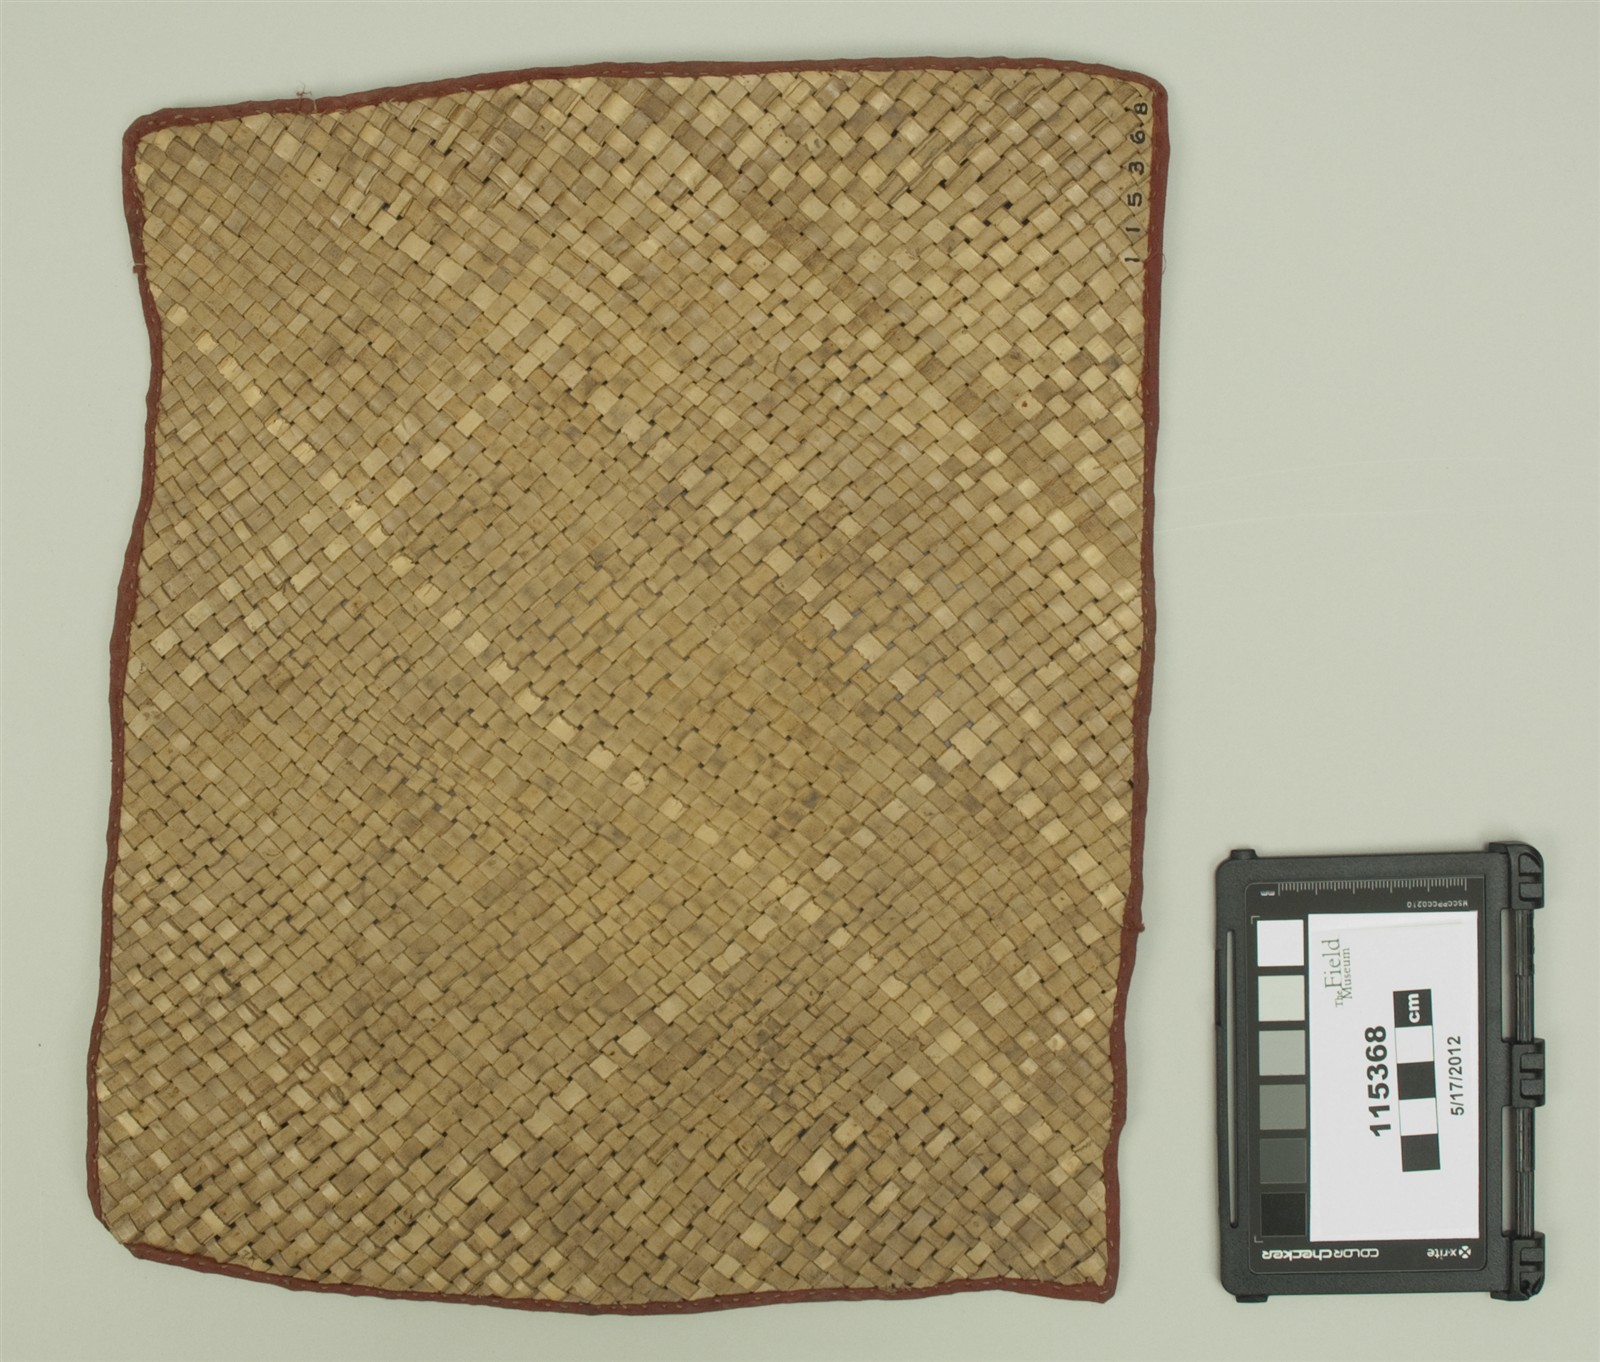 smaller mat side one (c) Field Museum of Natural History - CC BY-NC 4.0